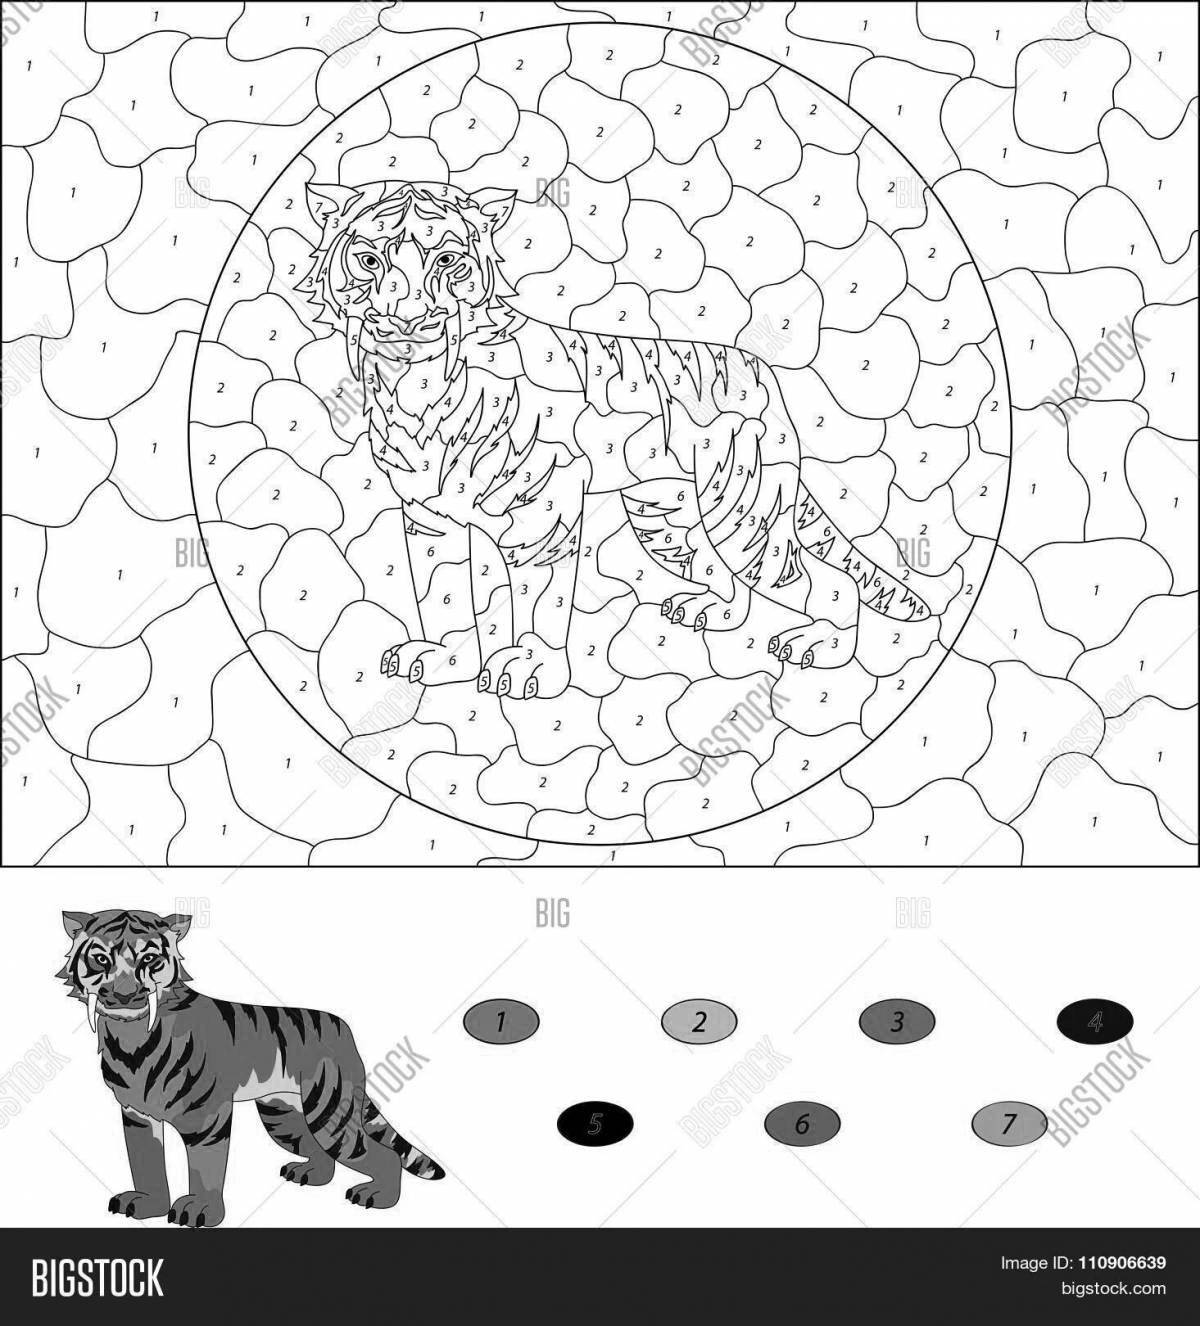 Humorous coloring wild by numbers